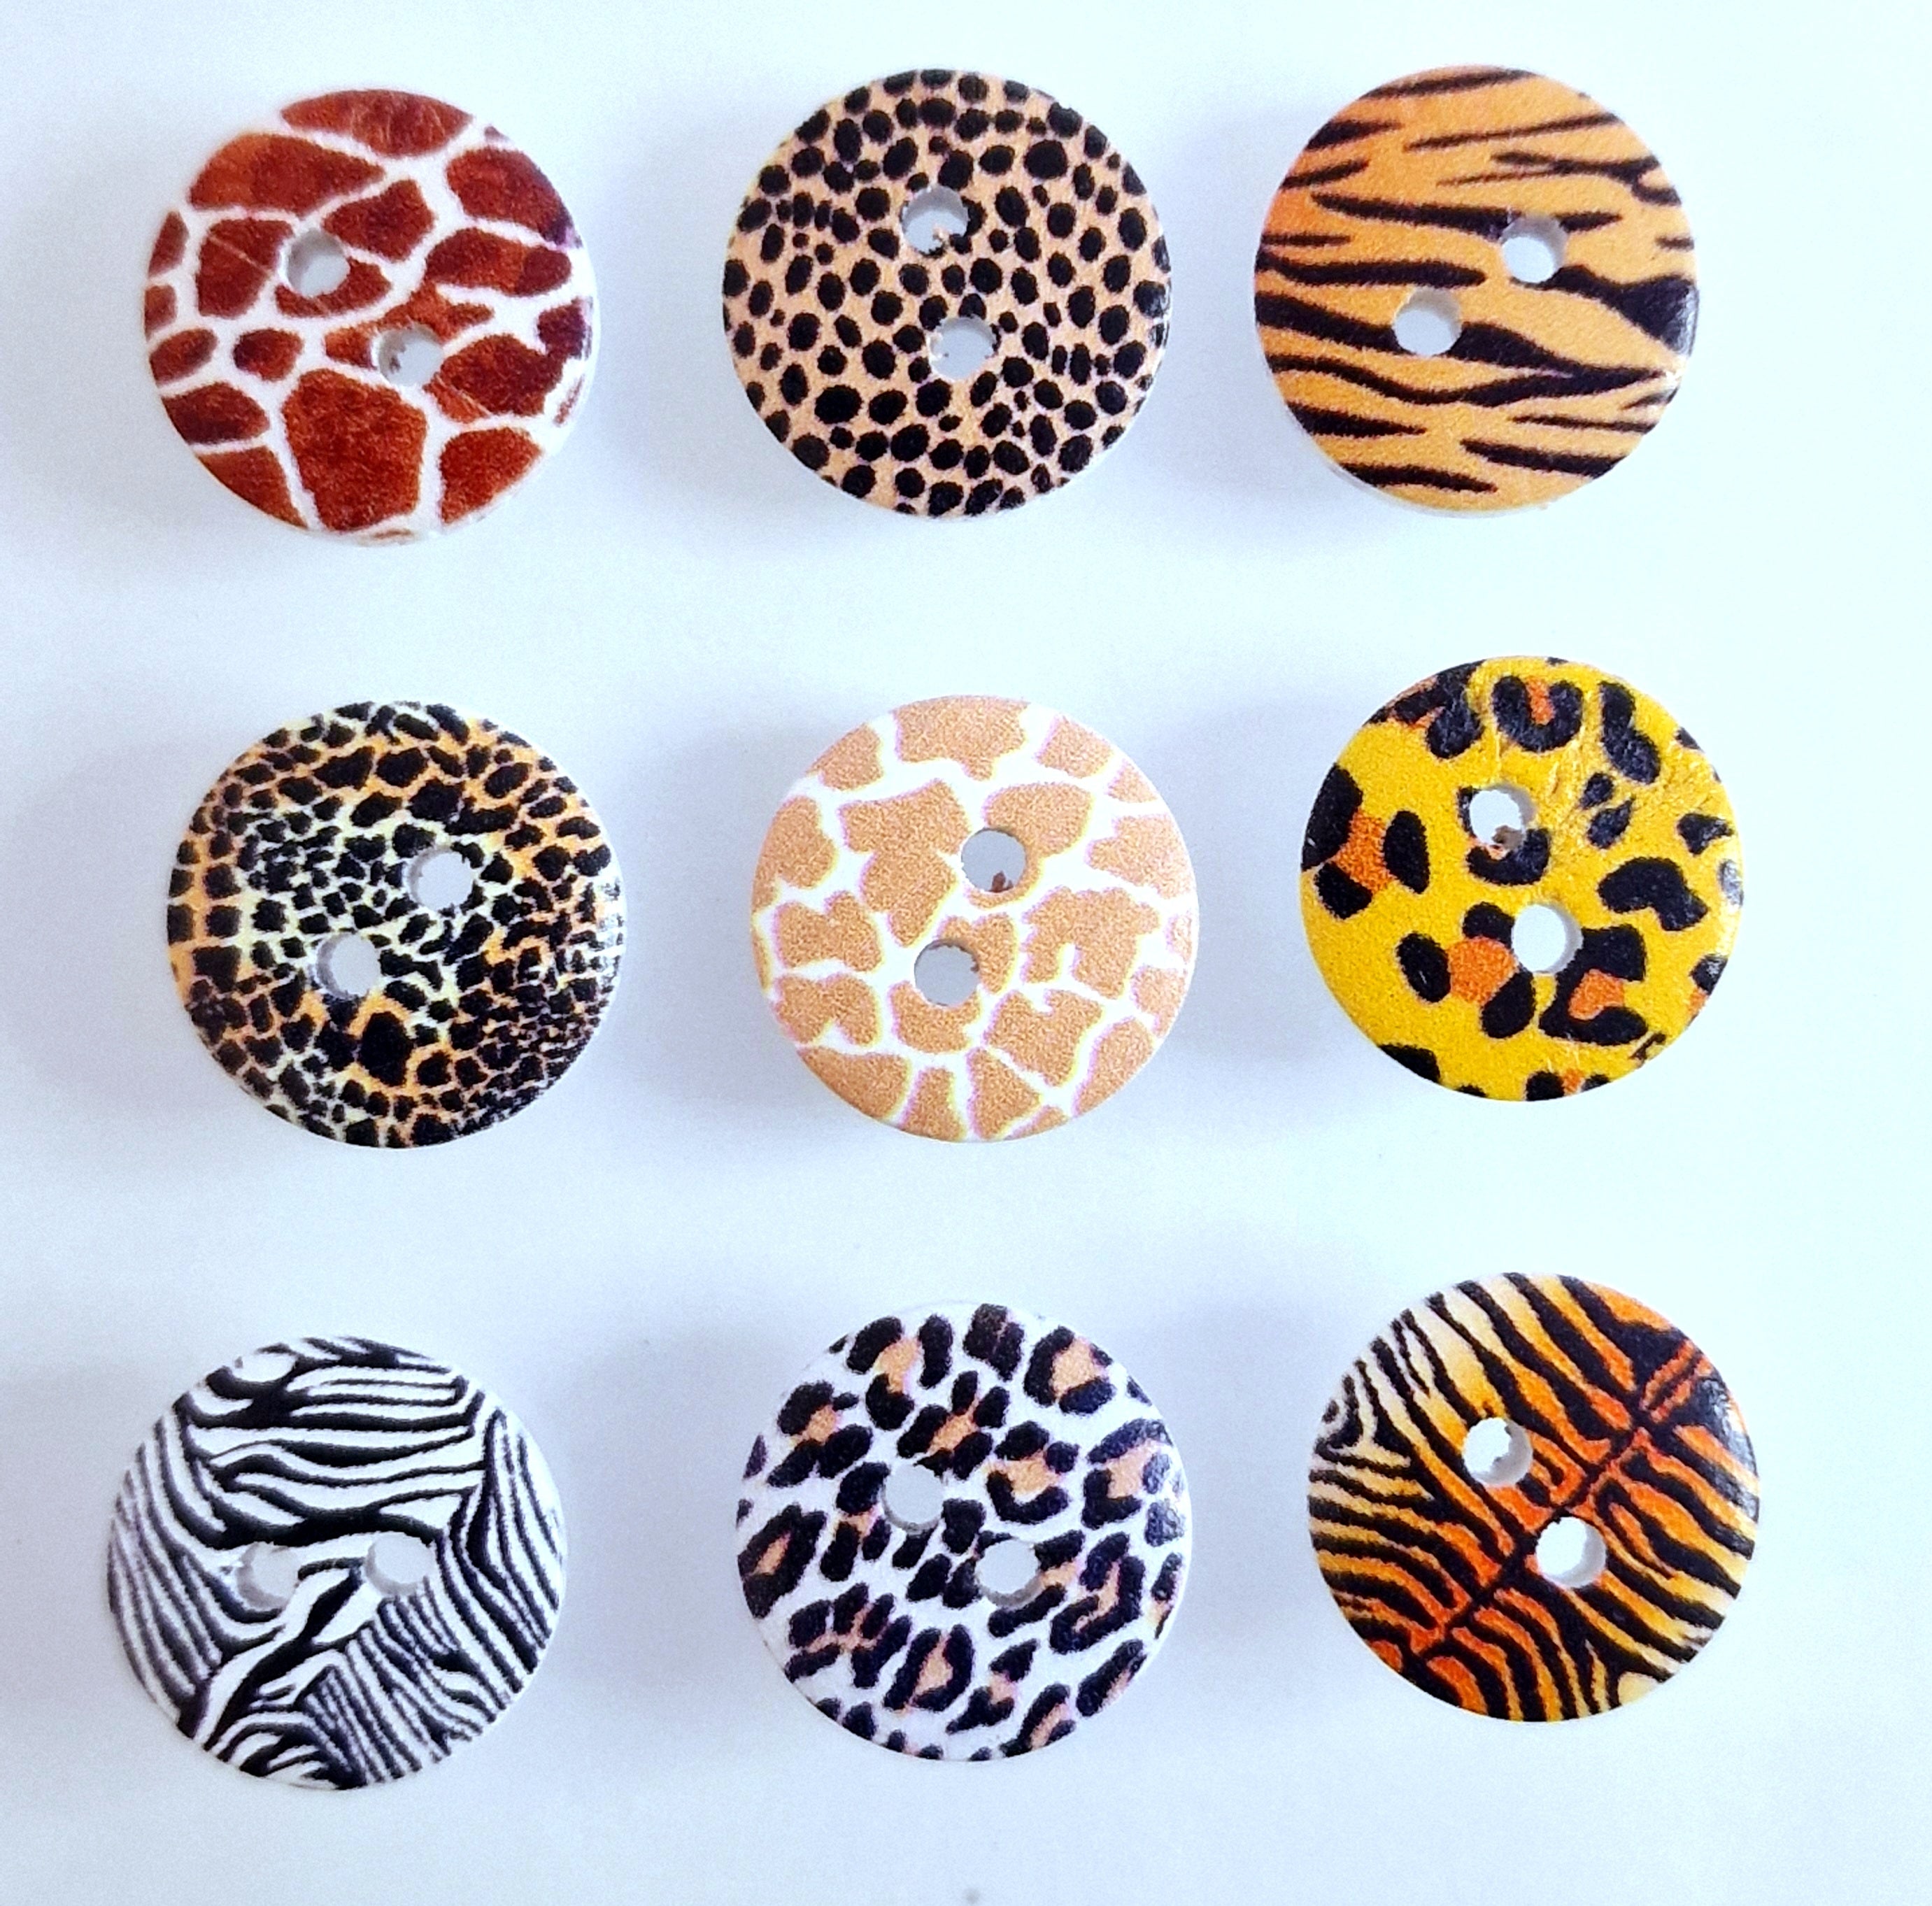 MajorCrafts 48pcs 15mm Mixed Animal Print 2 Holes Round Wood Sewing Buttons